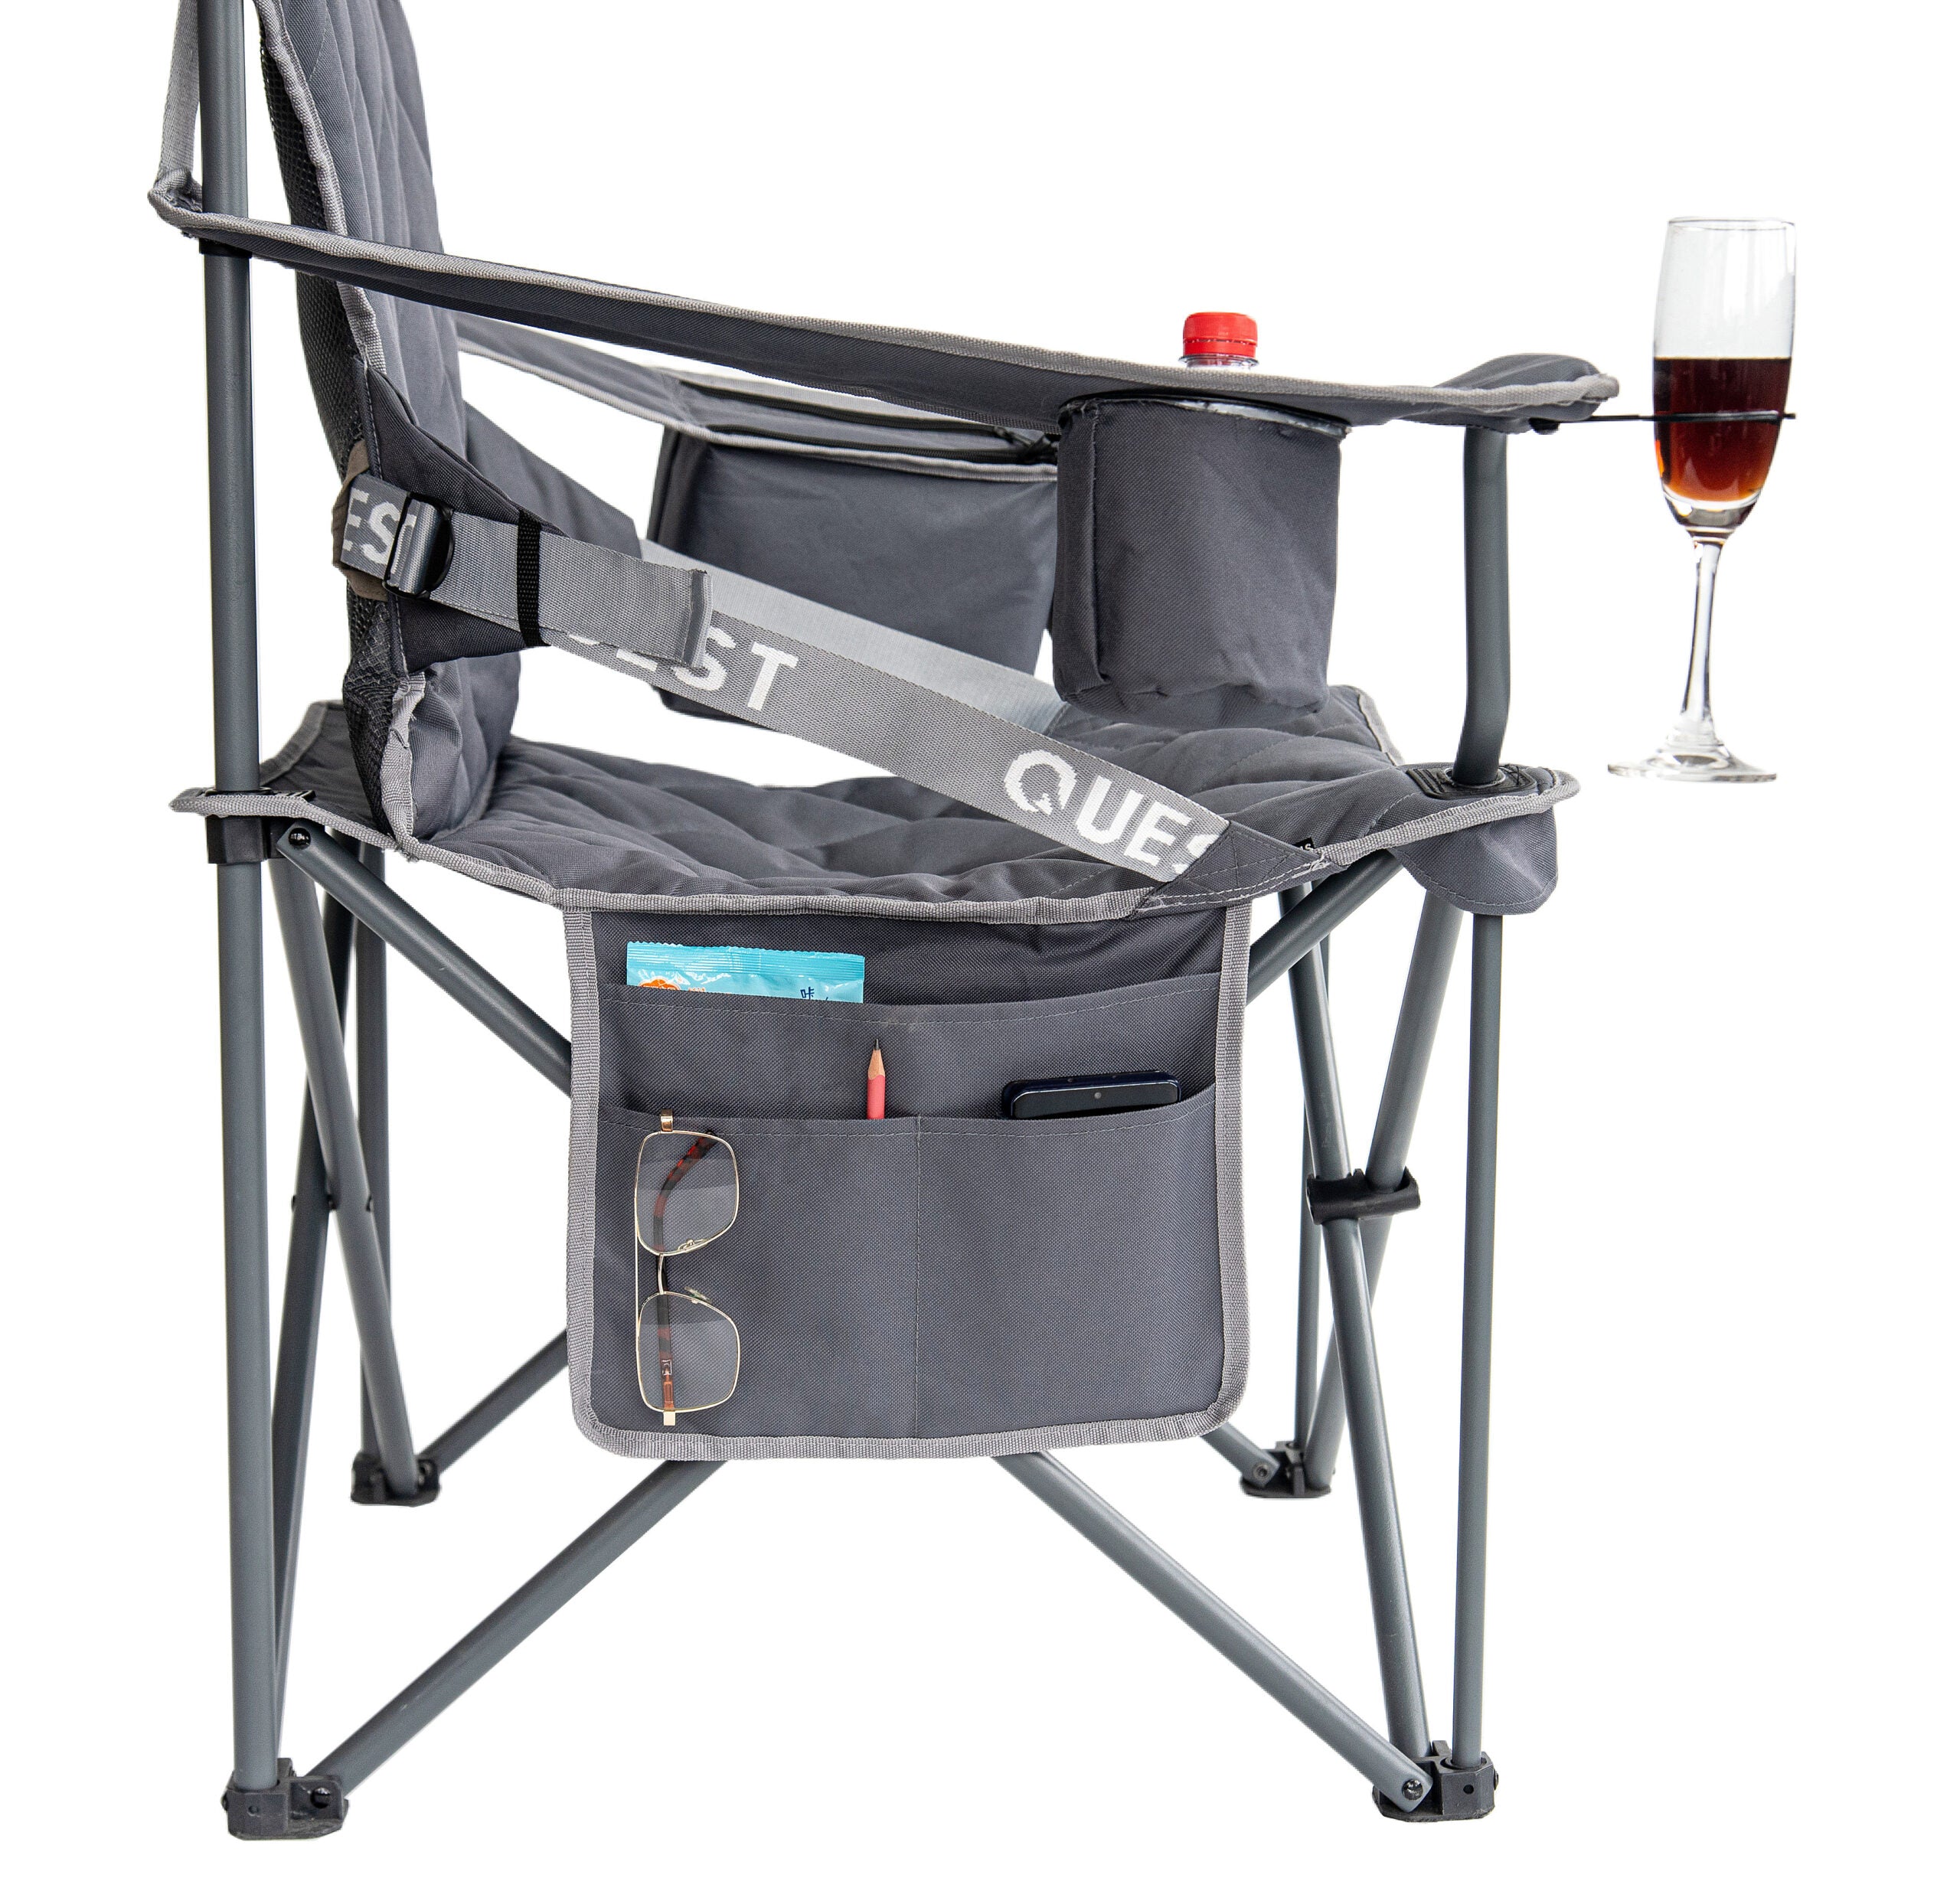 Quest Outdoors Big Mutha Chair